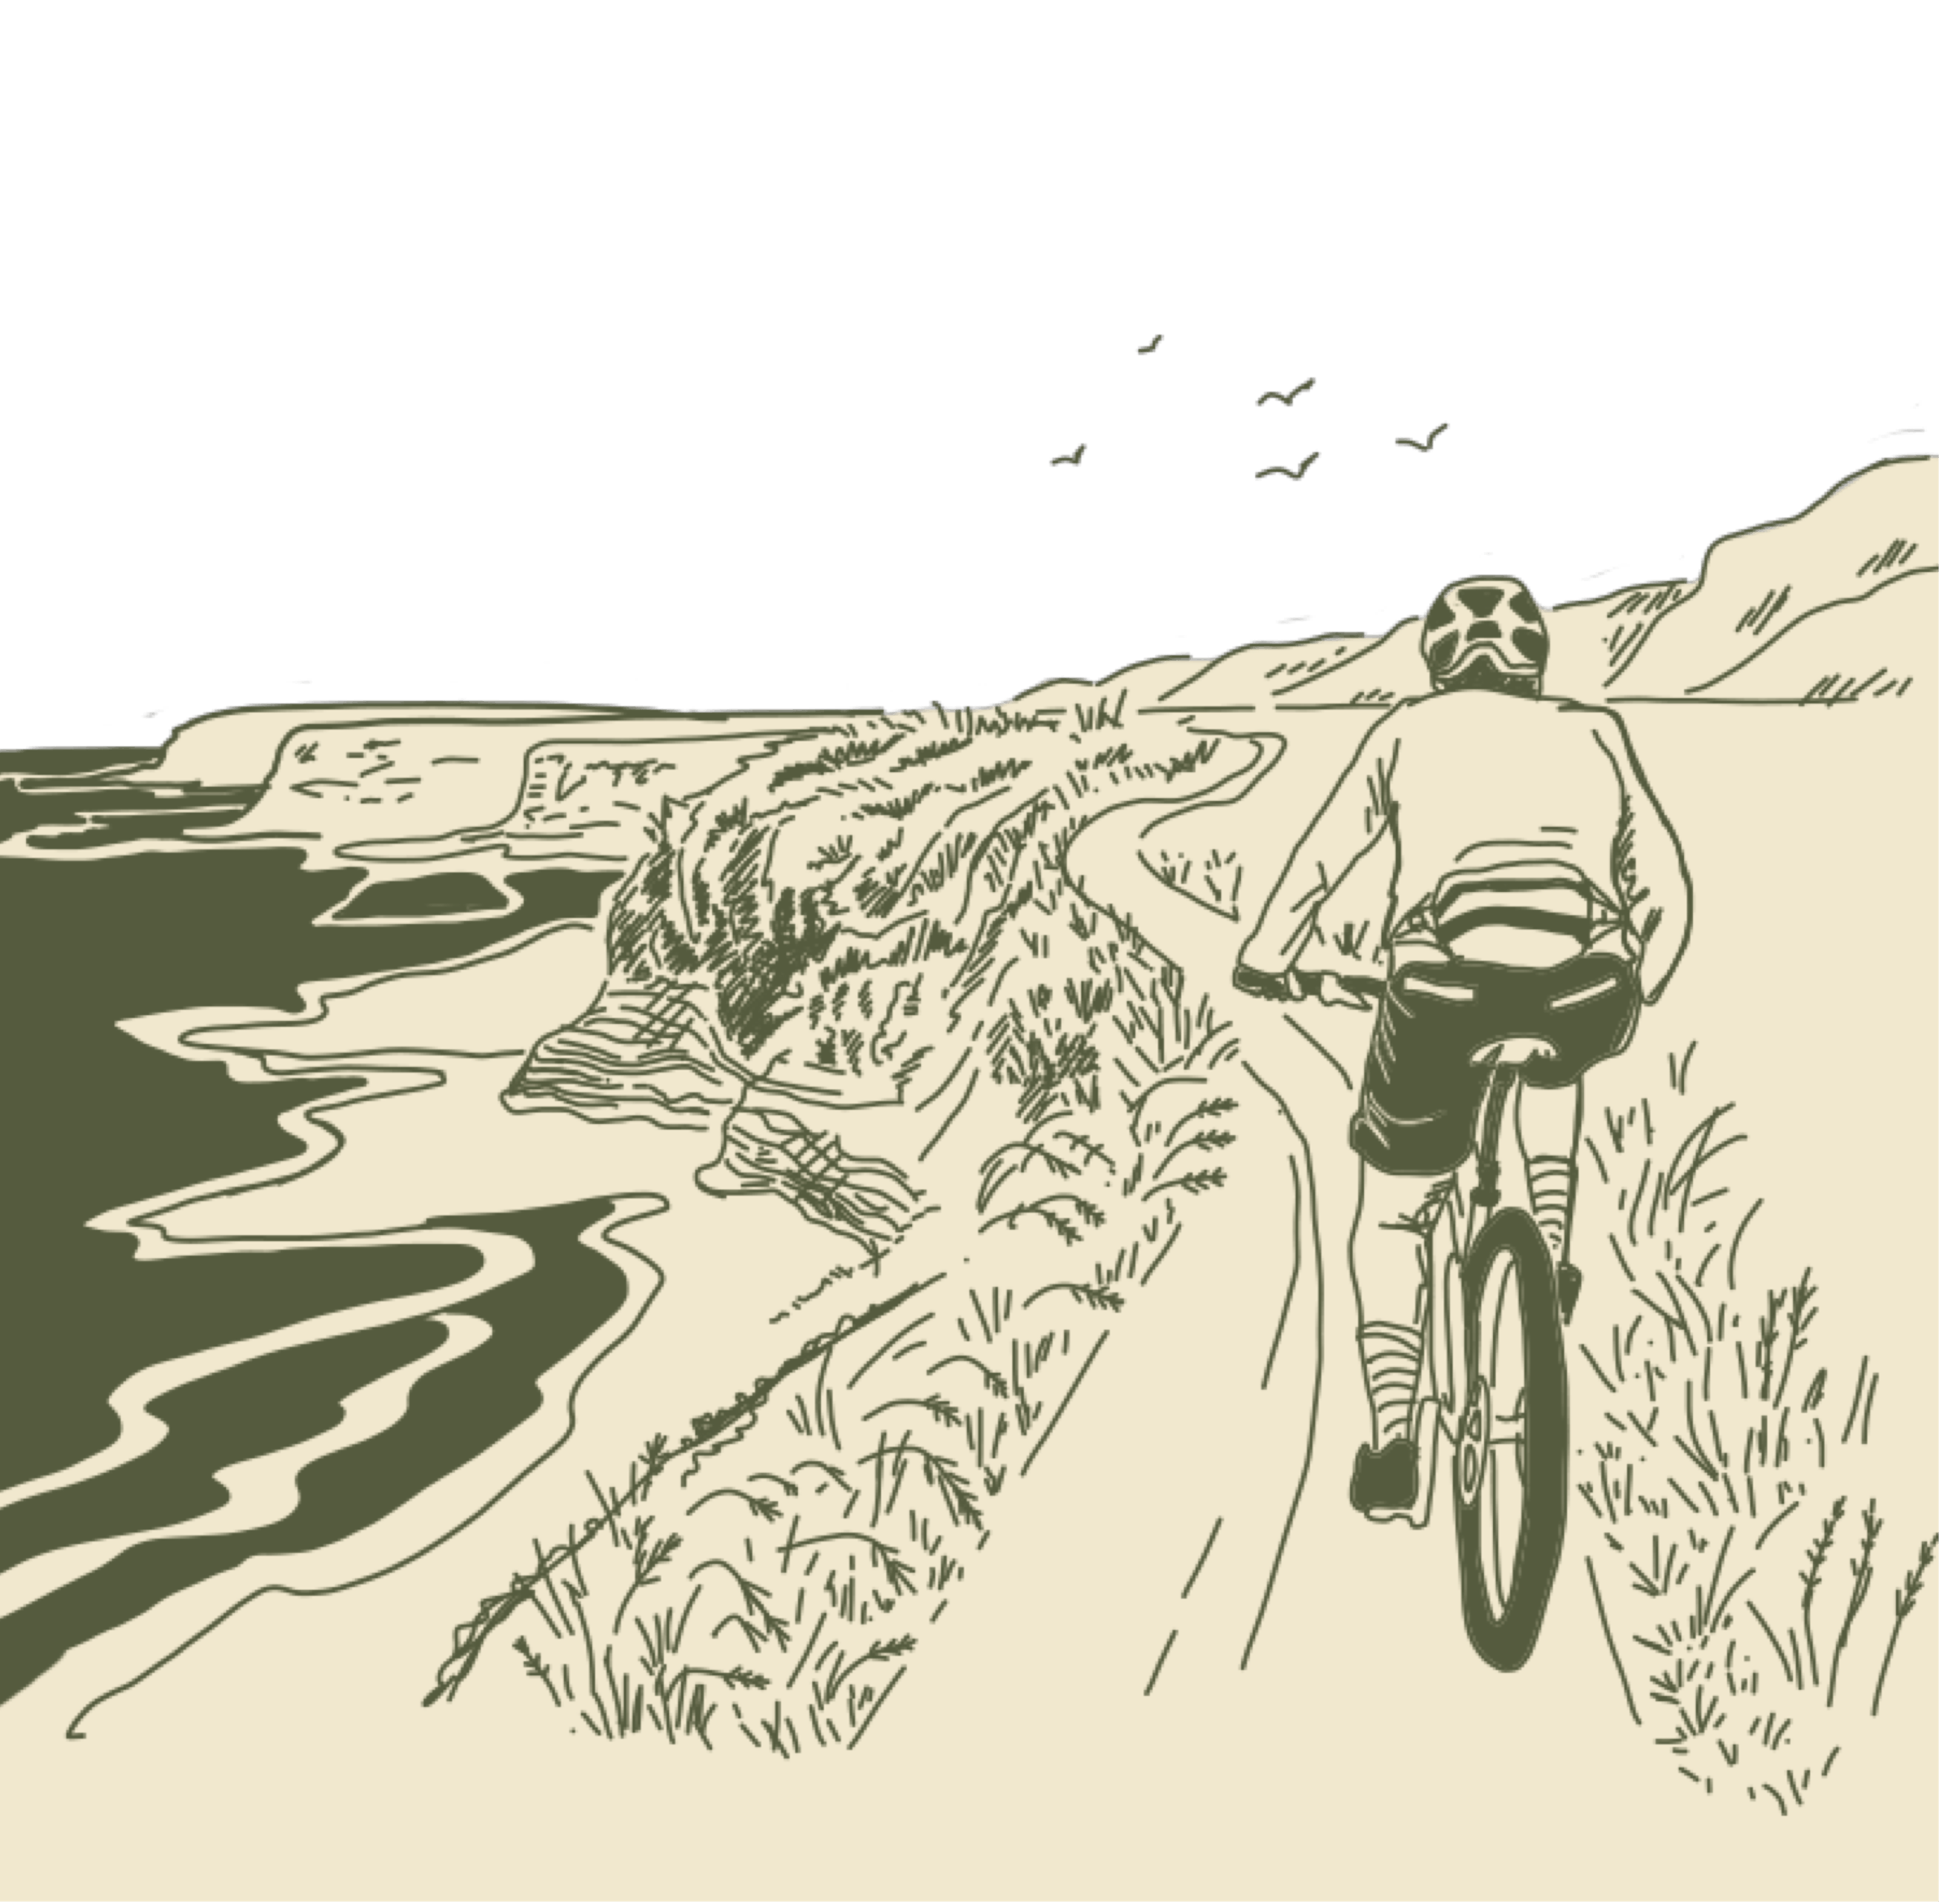 Drawing of mountain biker on trail with birds above.